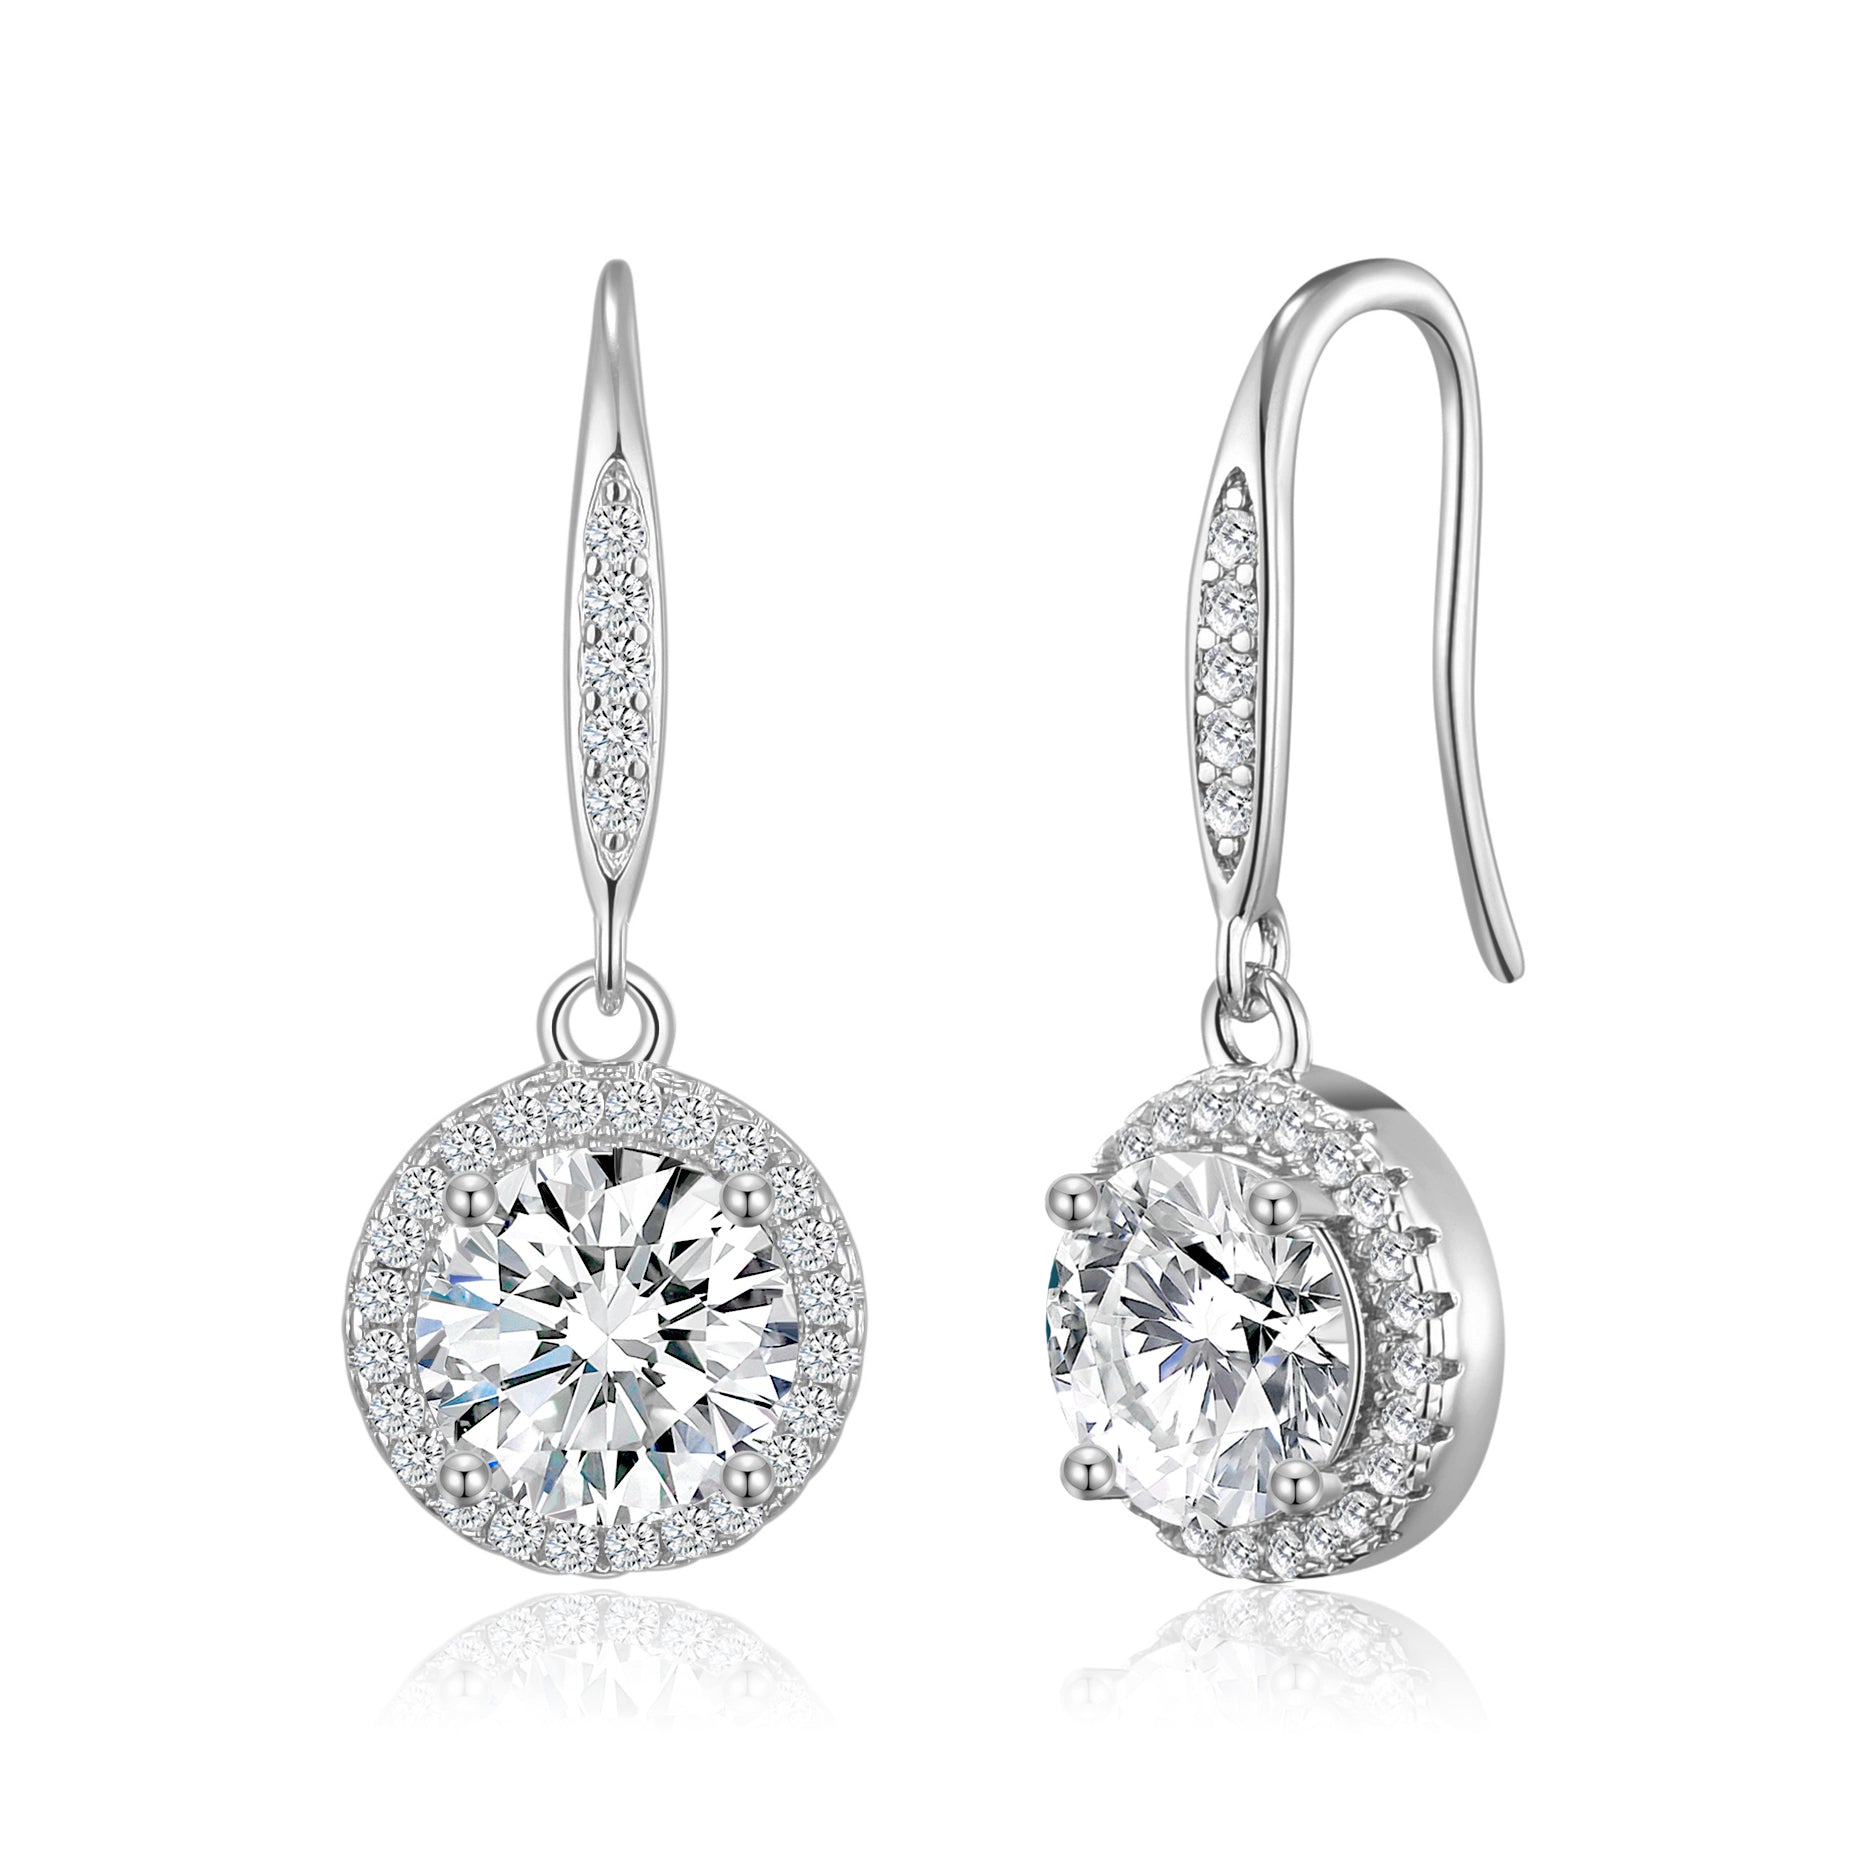 Silver Plated Halo Drop Earrings Created with Zircondia® Crystals by Philip Jones Jewellery